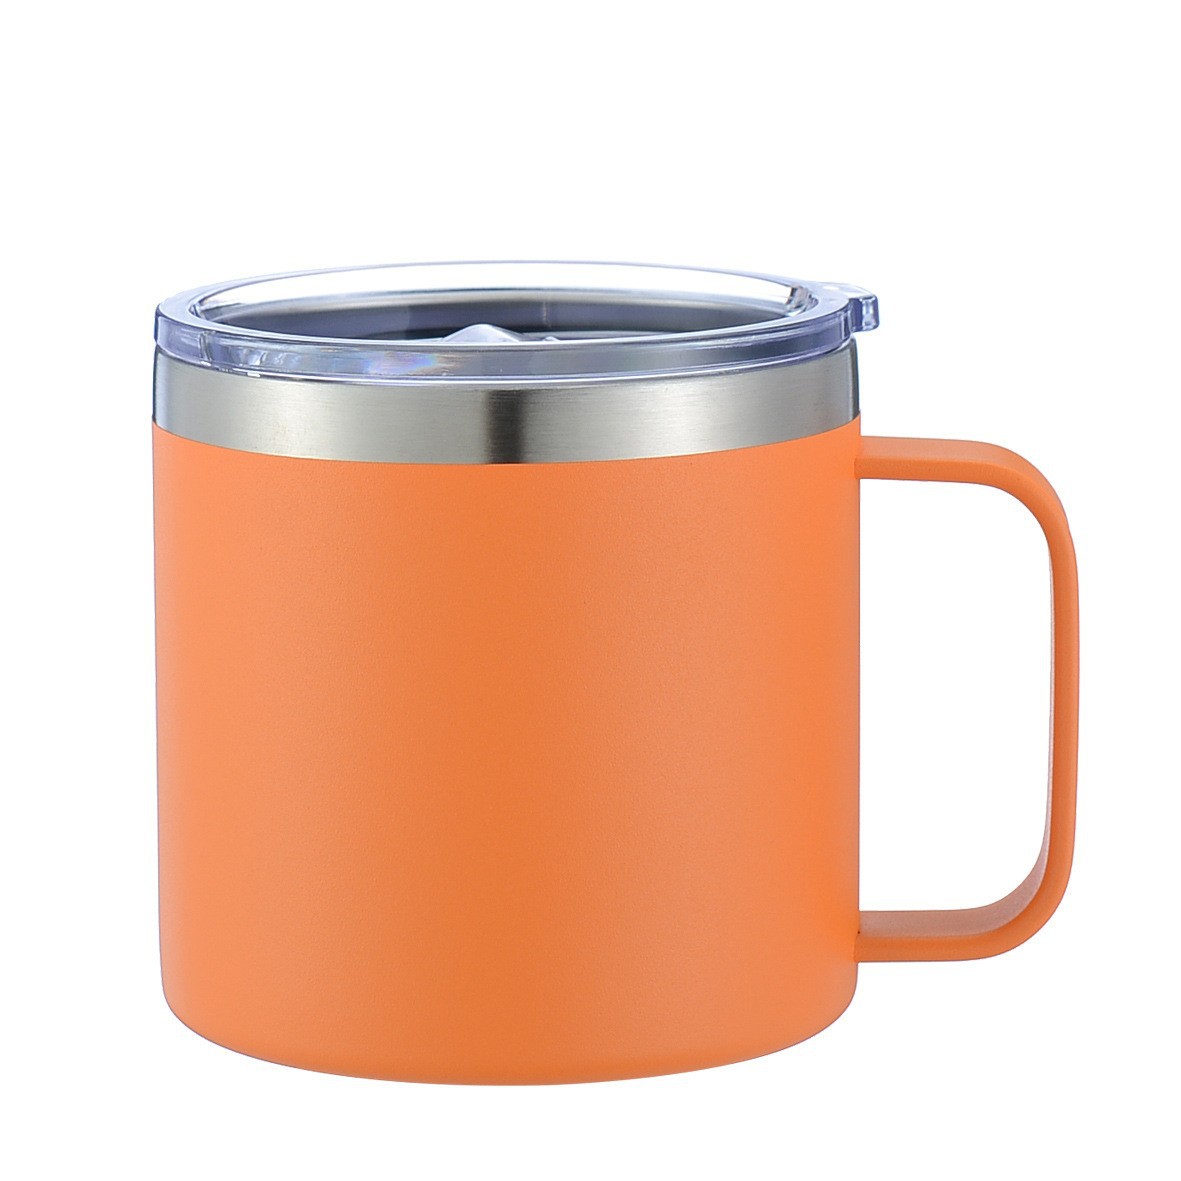 14oz Powder-coated Stainless Steel Insulated Mug with Lid and Handle: Perfect for Keeping Your Beverages Hot or Cold in the Office